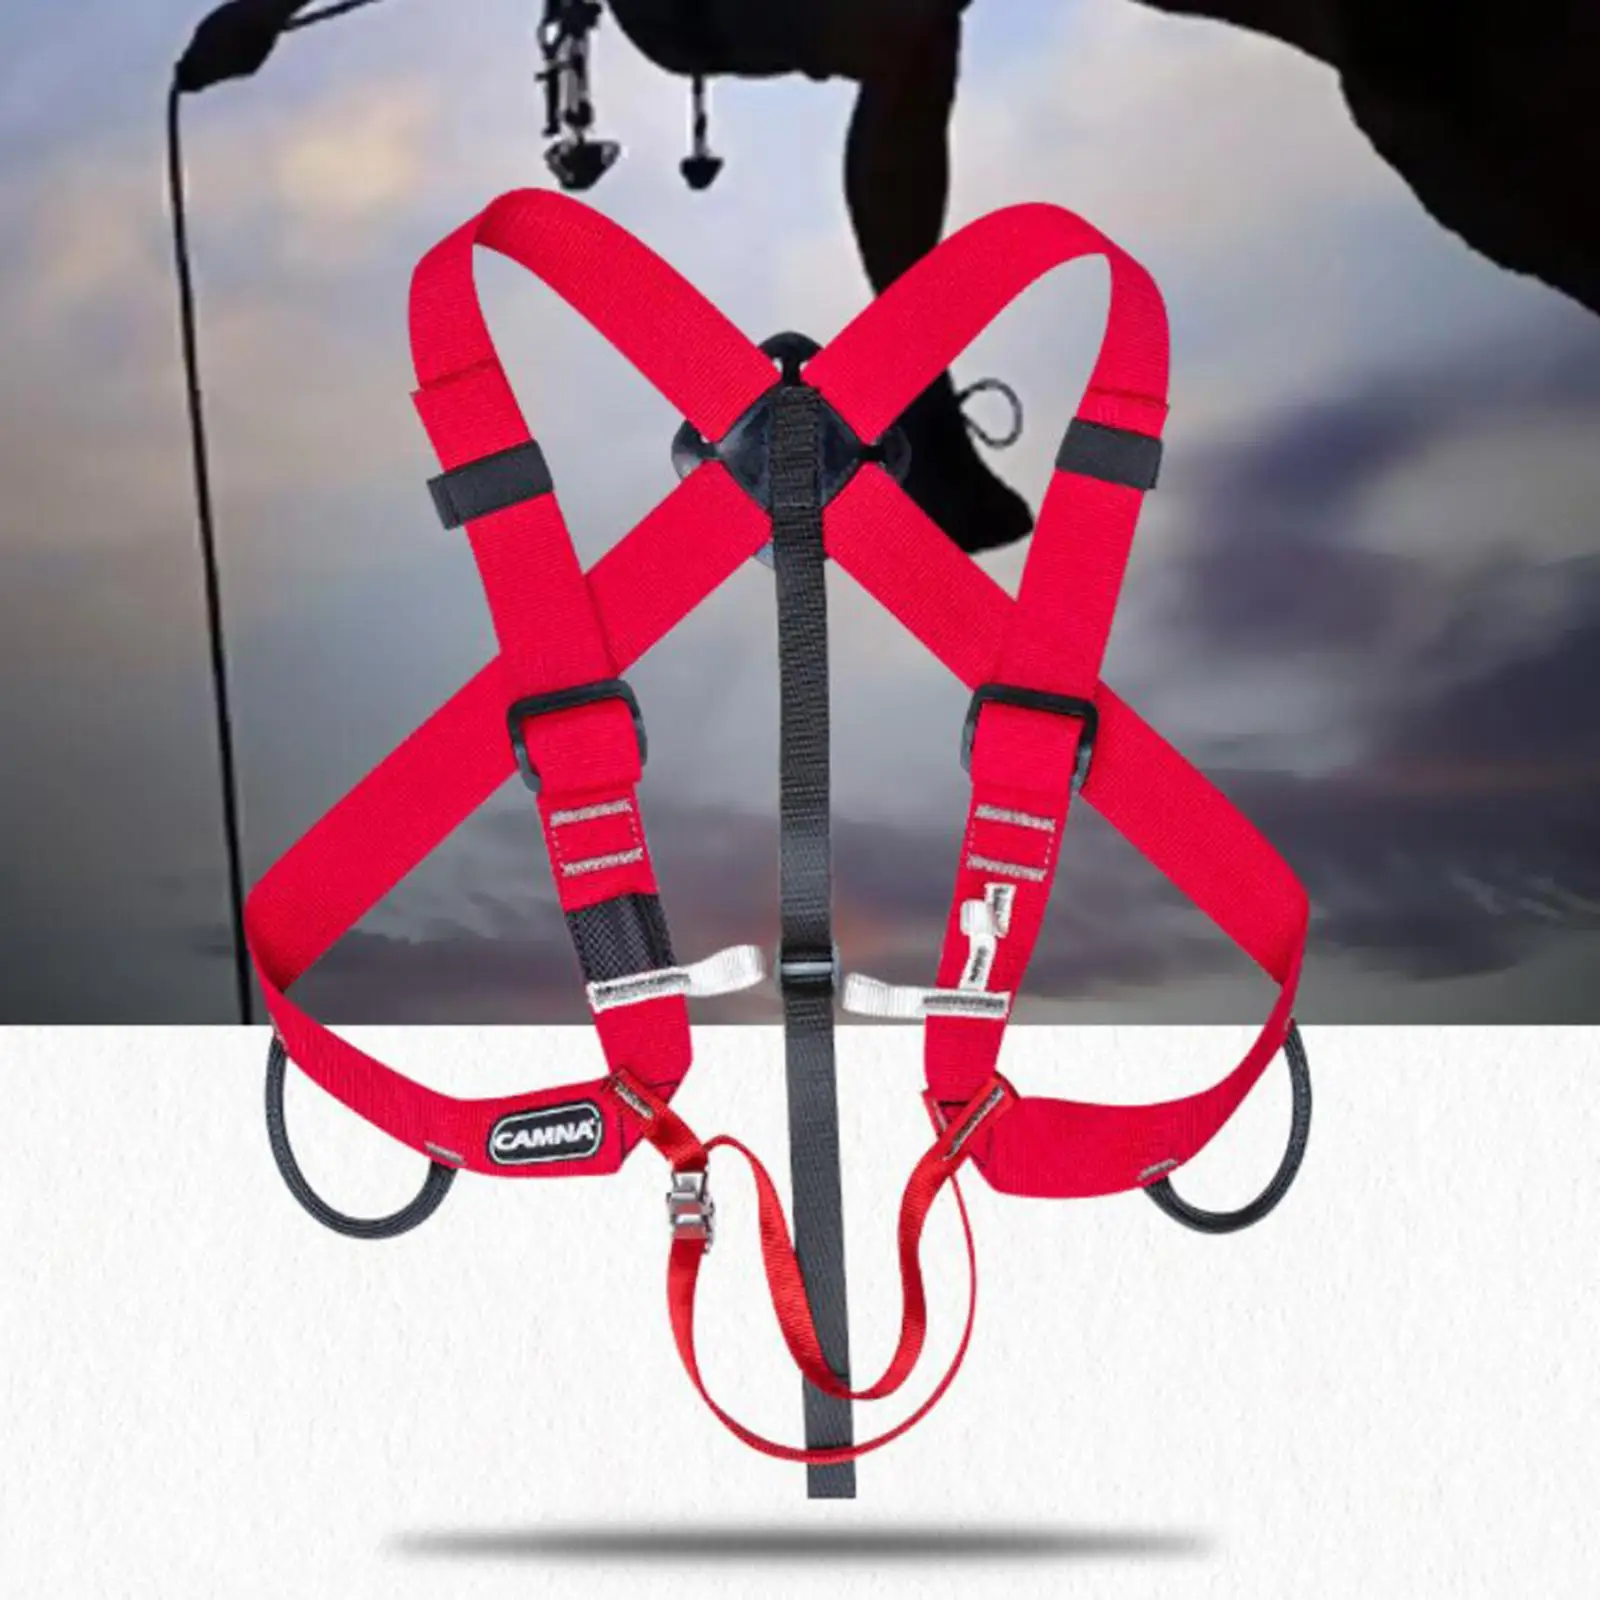 Camping Rock Climb Safety Harness Ascending Decive Fixed Belt for Survival